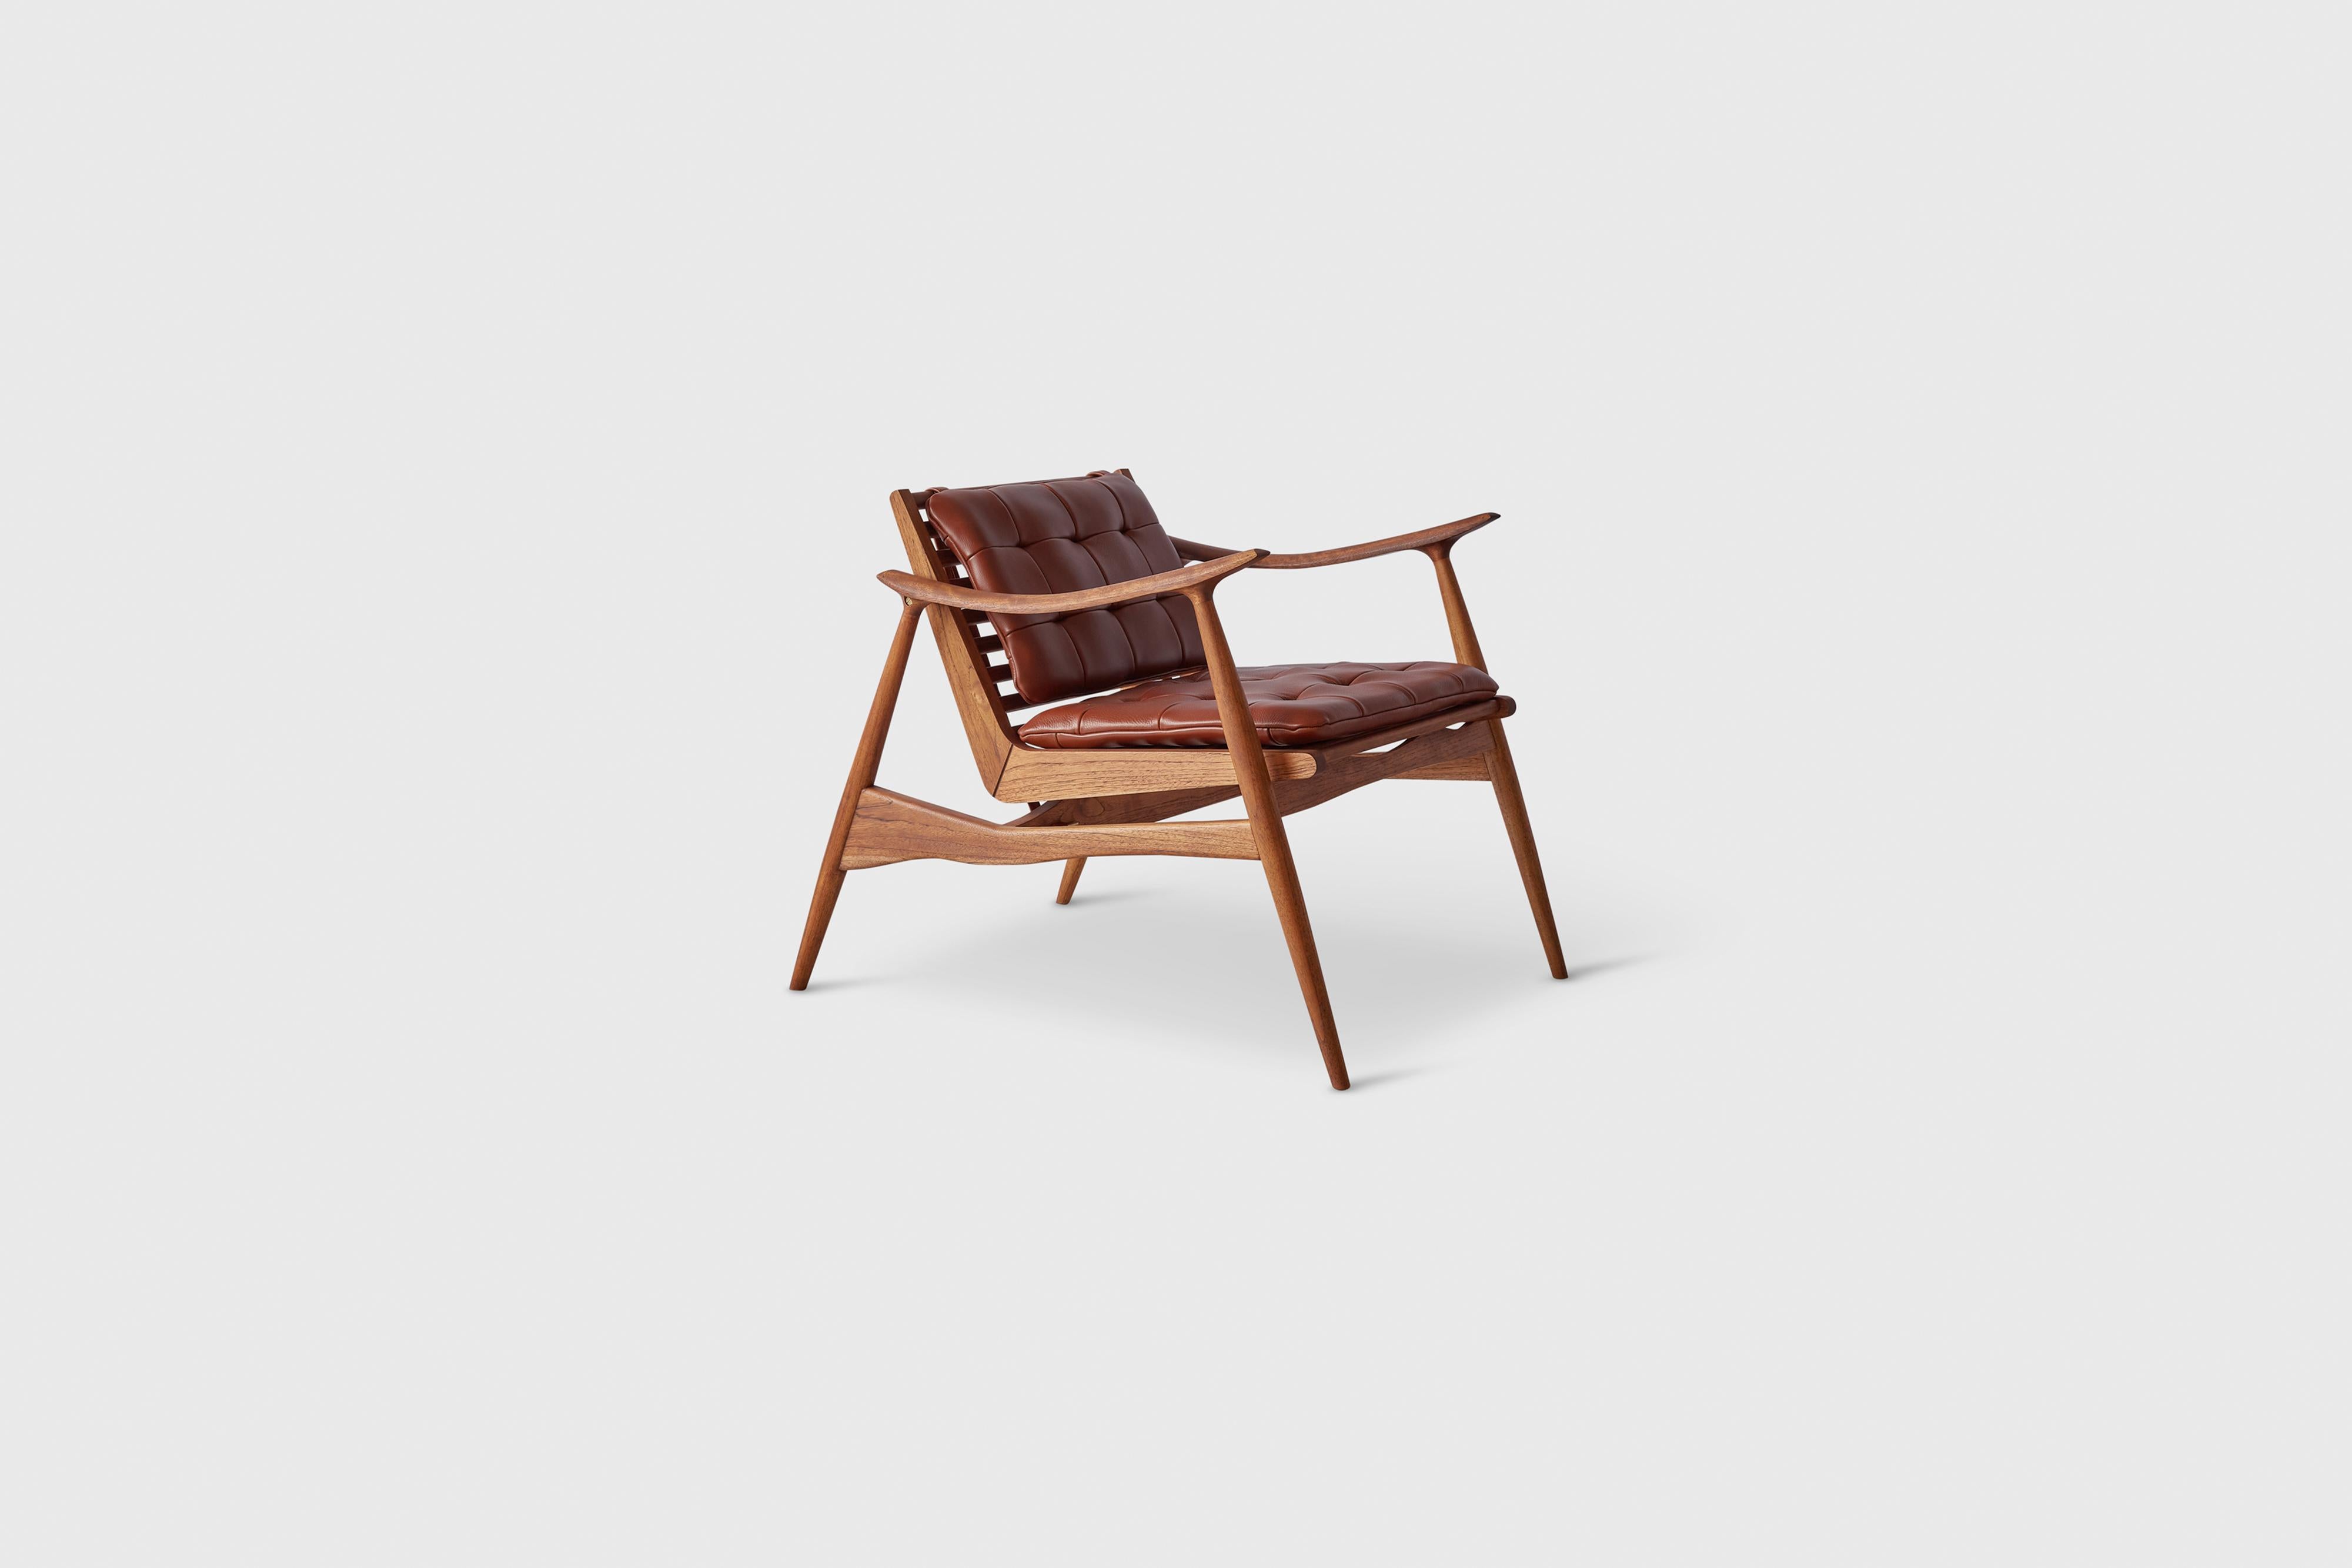 Brown Atra lounge chair by Atra Design
Dimensions: D 92 x W 66 x H 73 cm
Materials: leather, mahogany, walnut
Available in other colors.

Atra Design
We are Atra, a furniture brand produced by Atra form a mexico city–based high end production